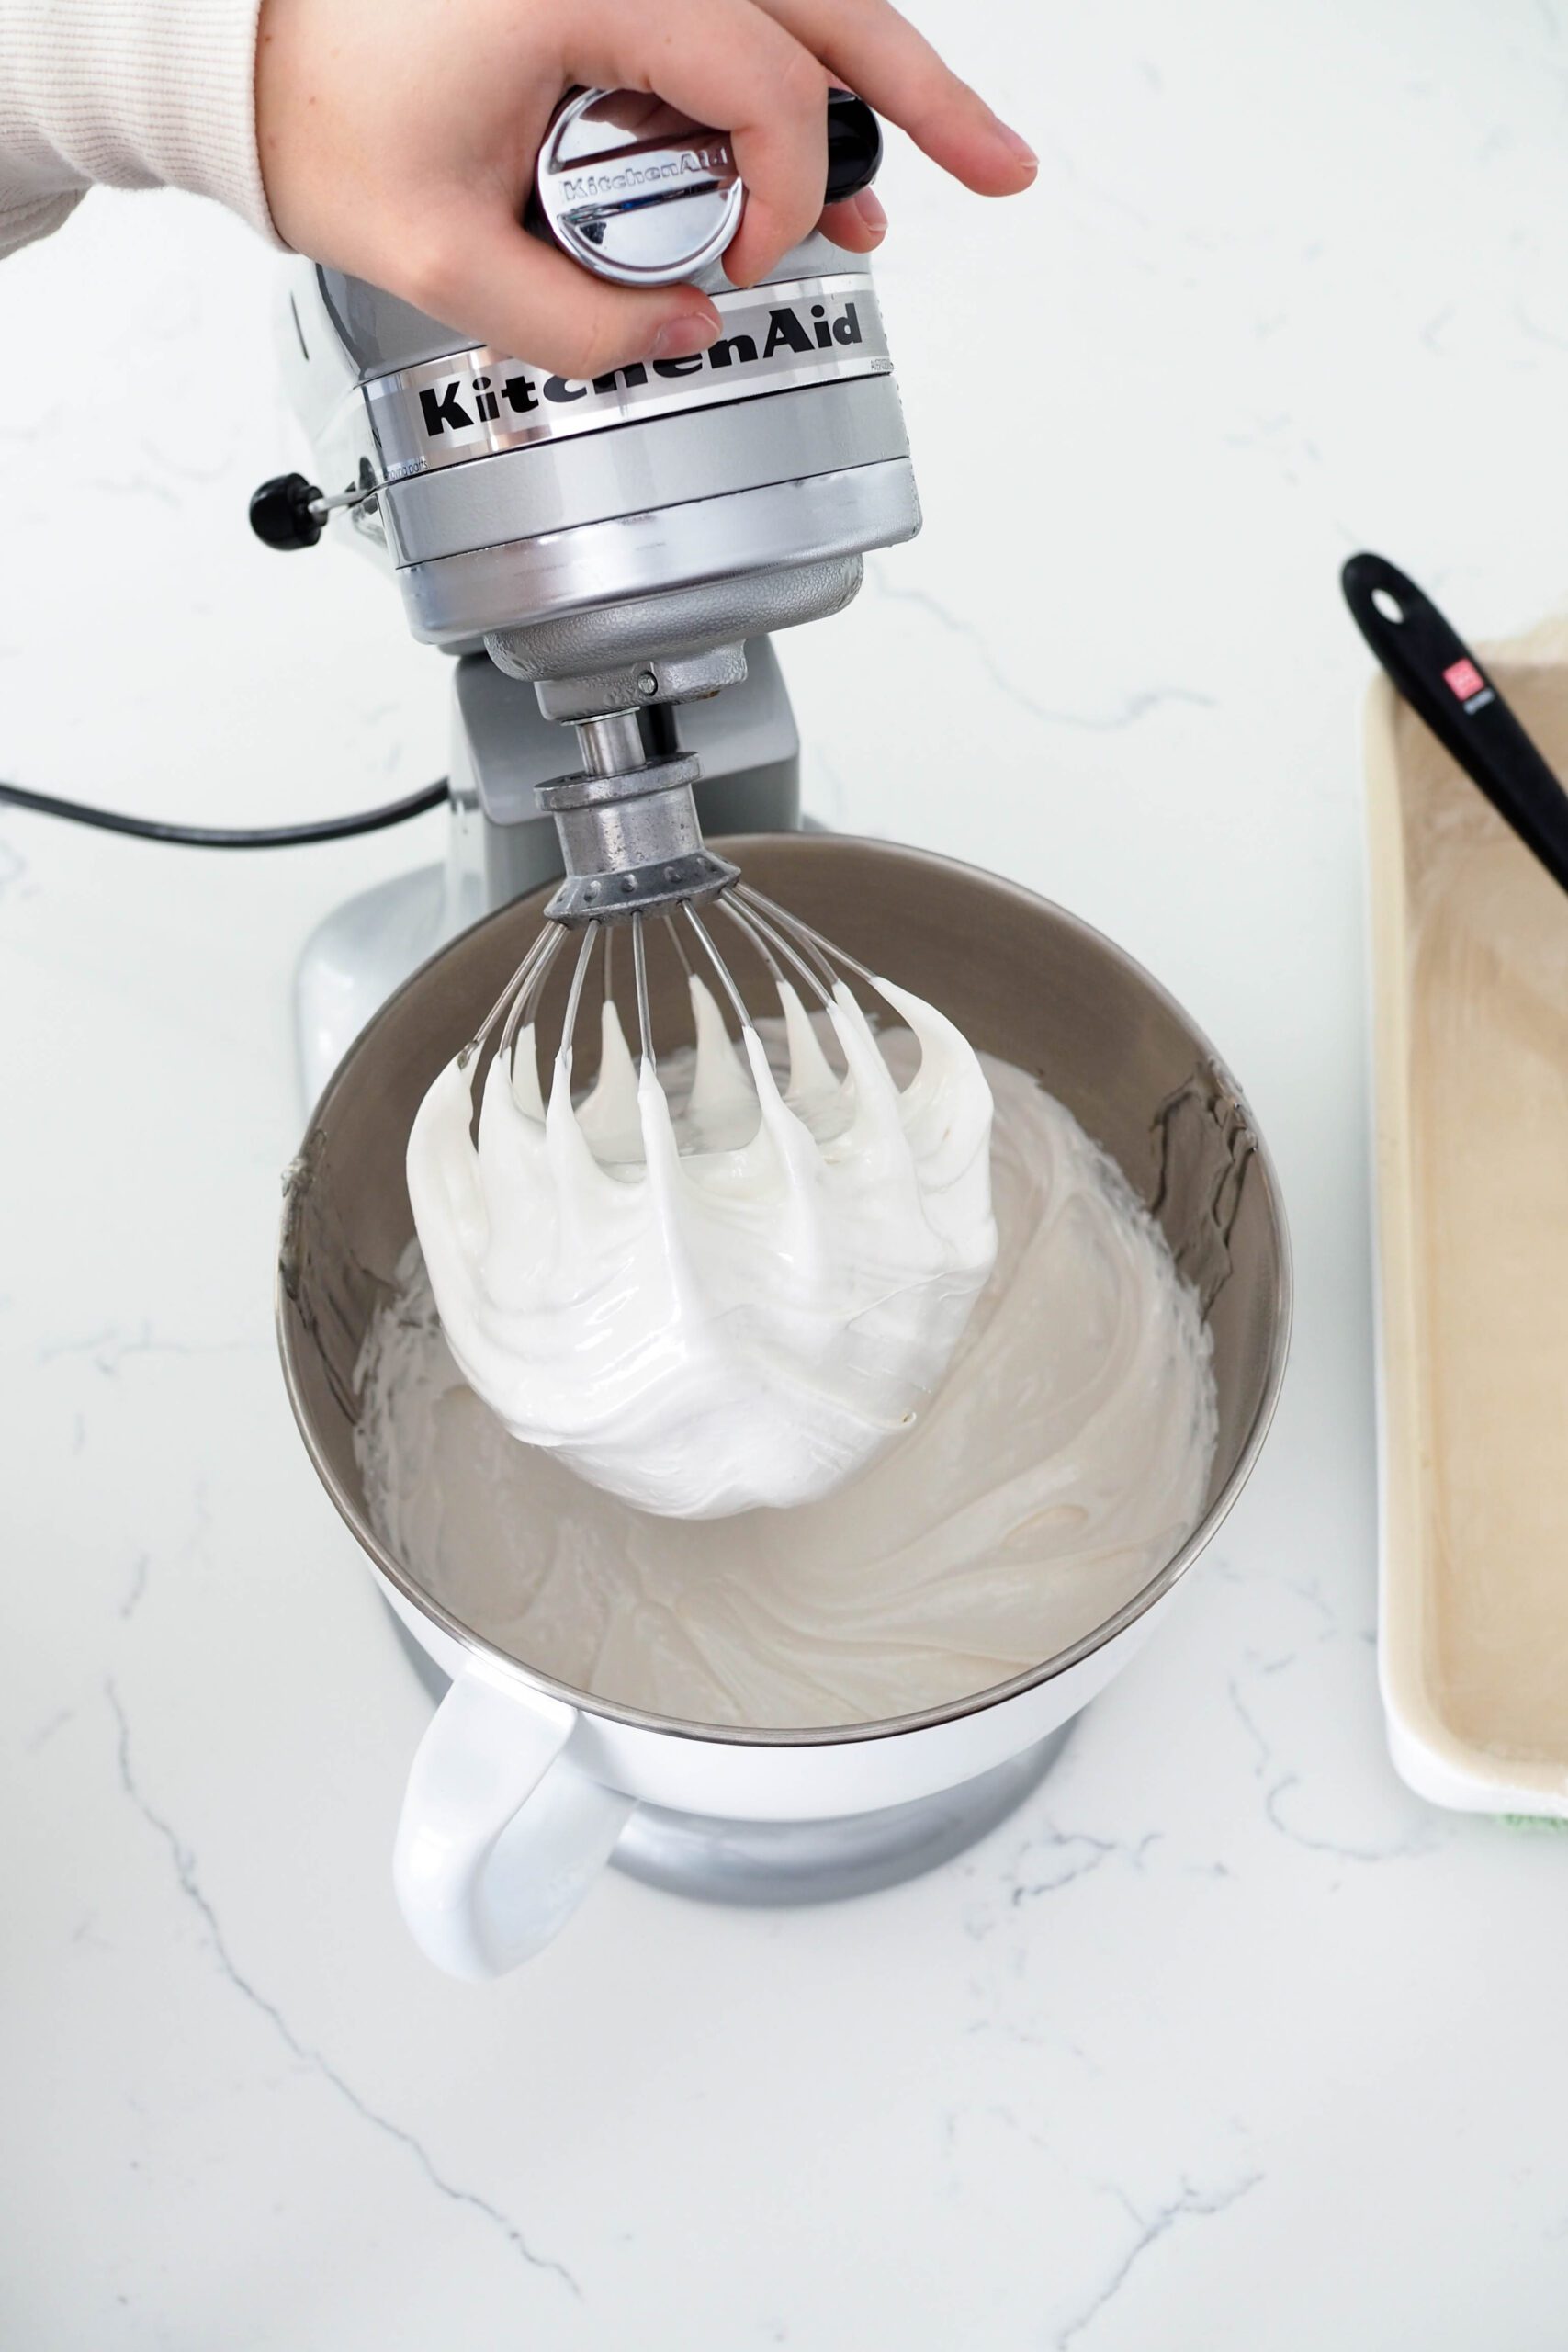 Marshmallow is clumped into the base of the whisk of a stand mixer.